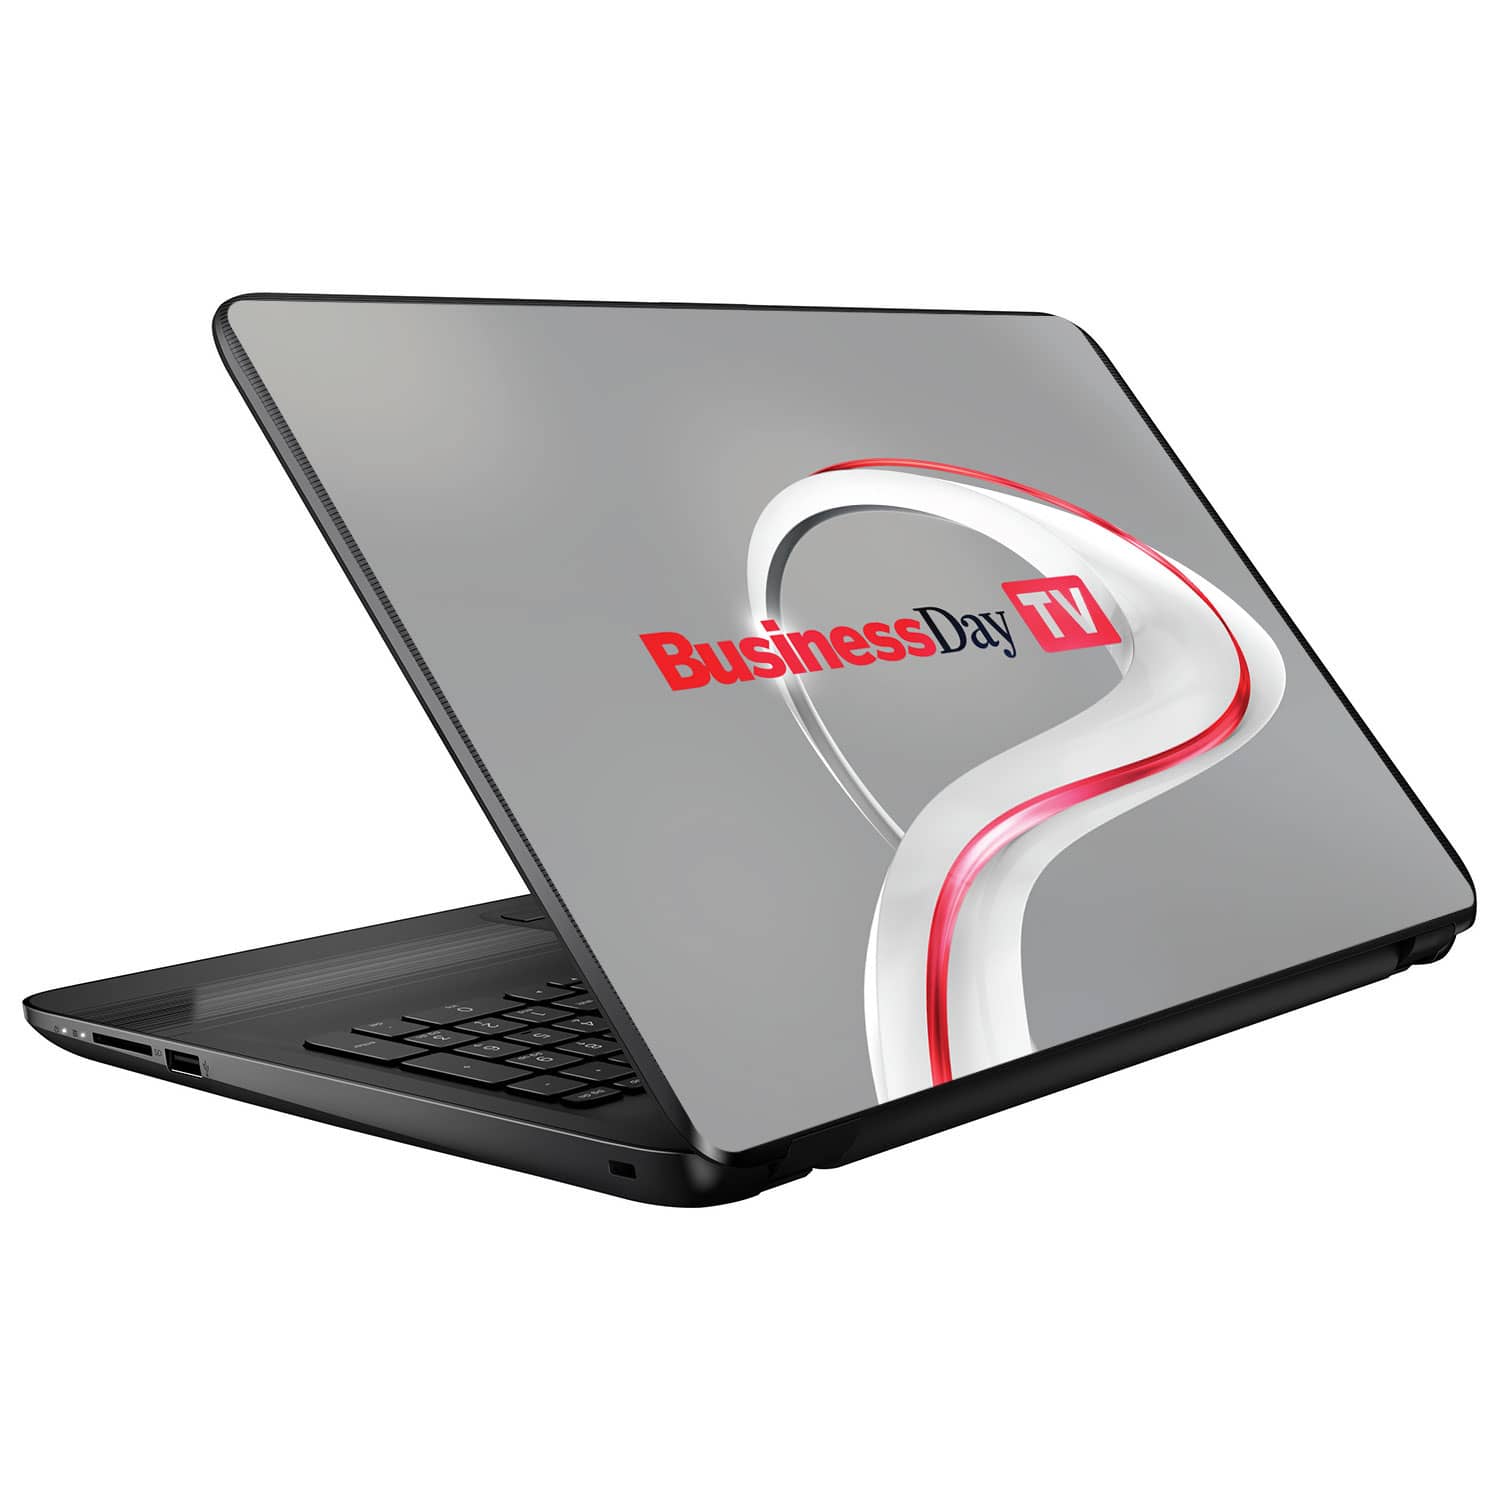 Business Day TV laptop Skins